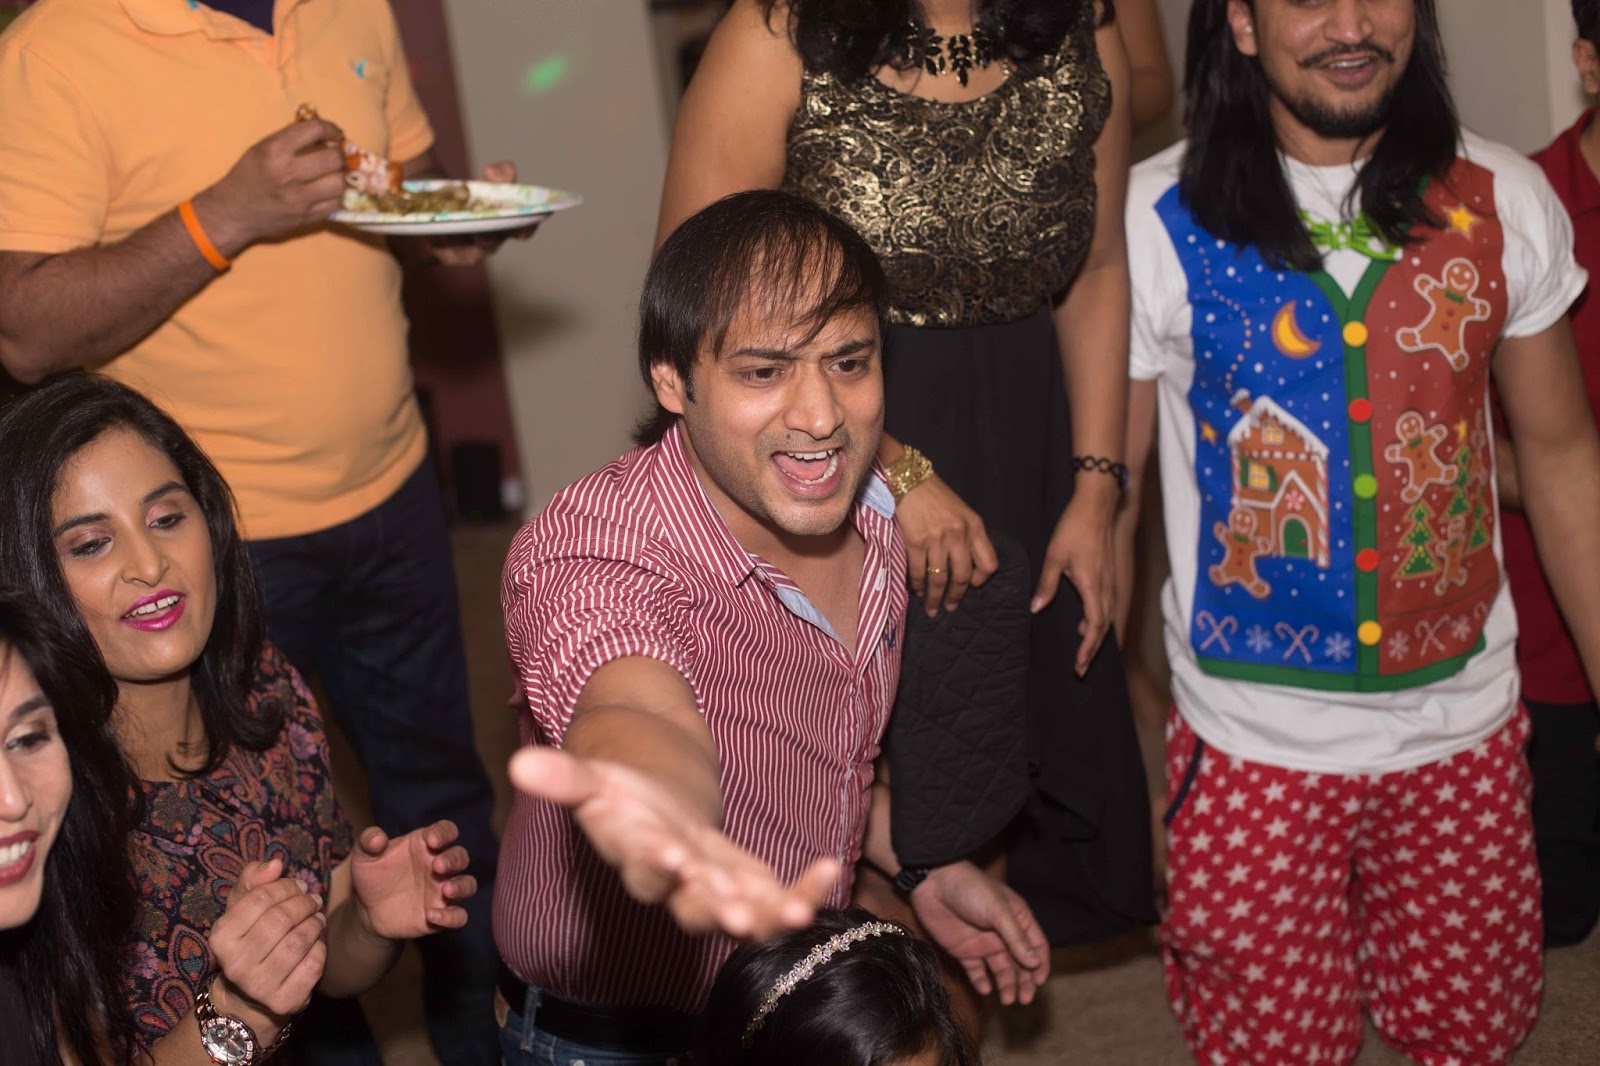 christmas party 2015, house parties, seattle parties, ananya in a party, girls wearing white and red dresses